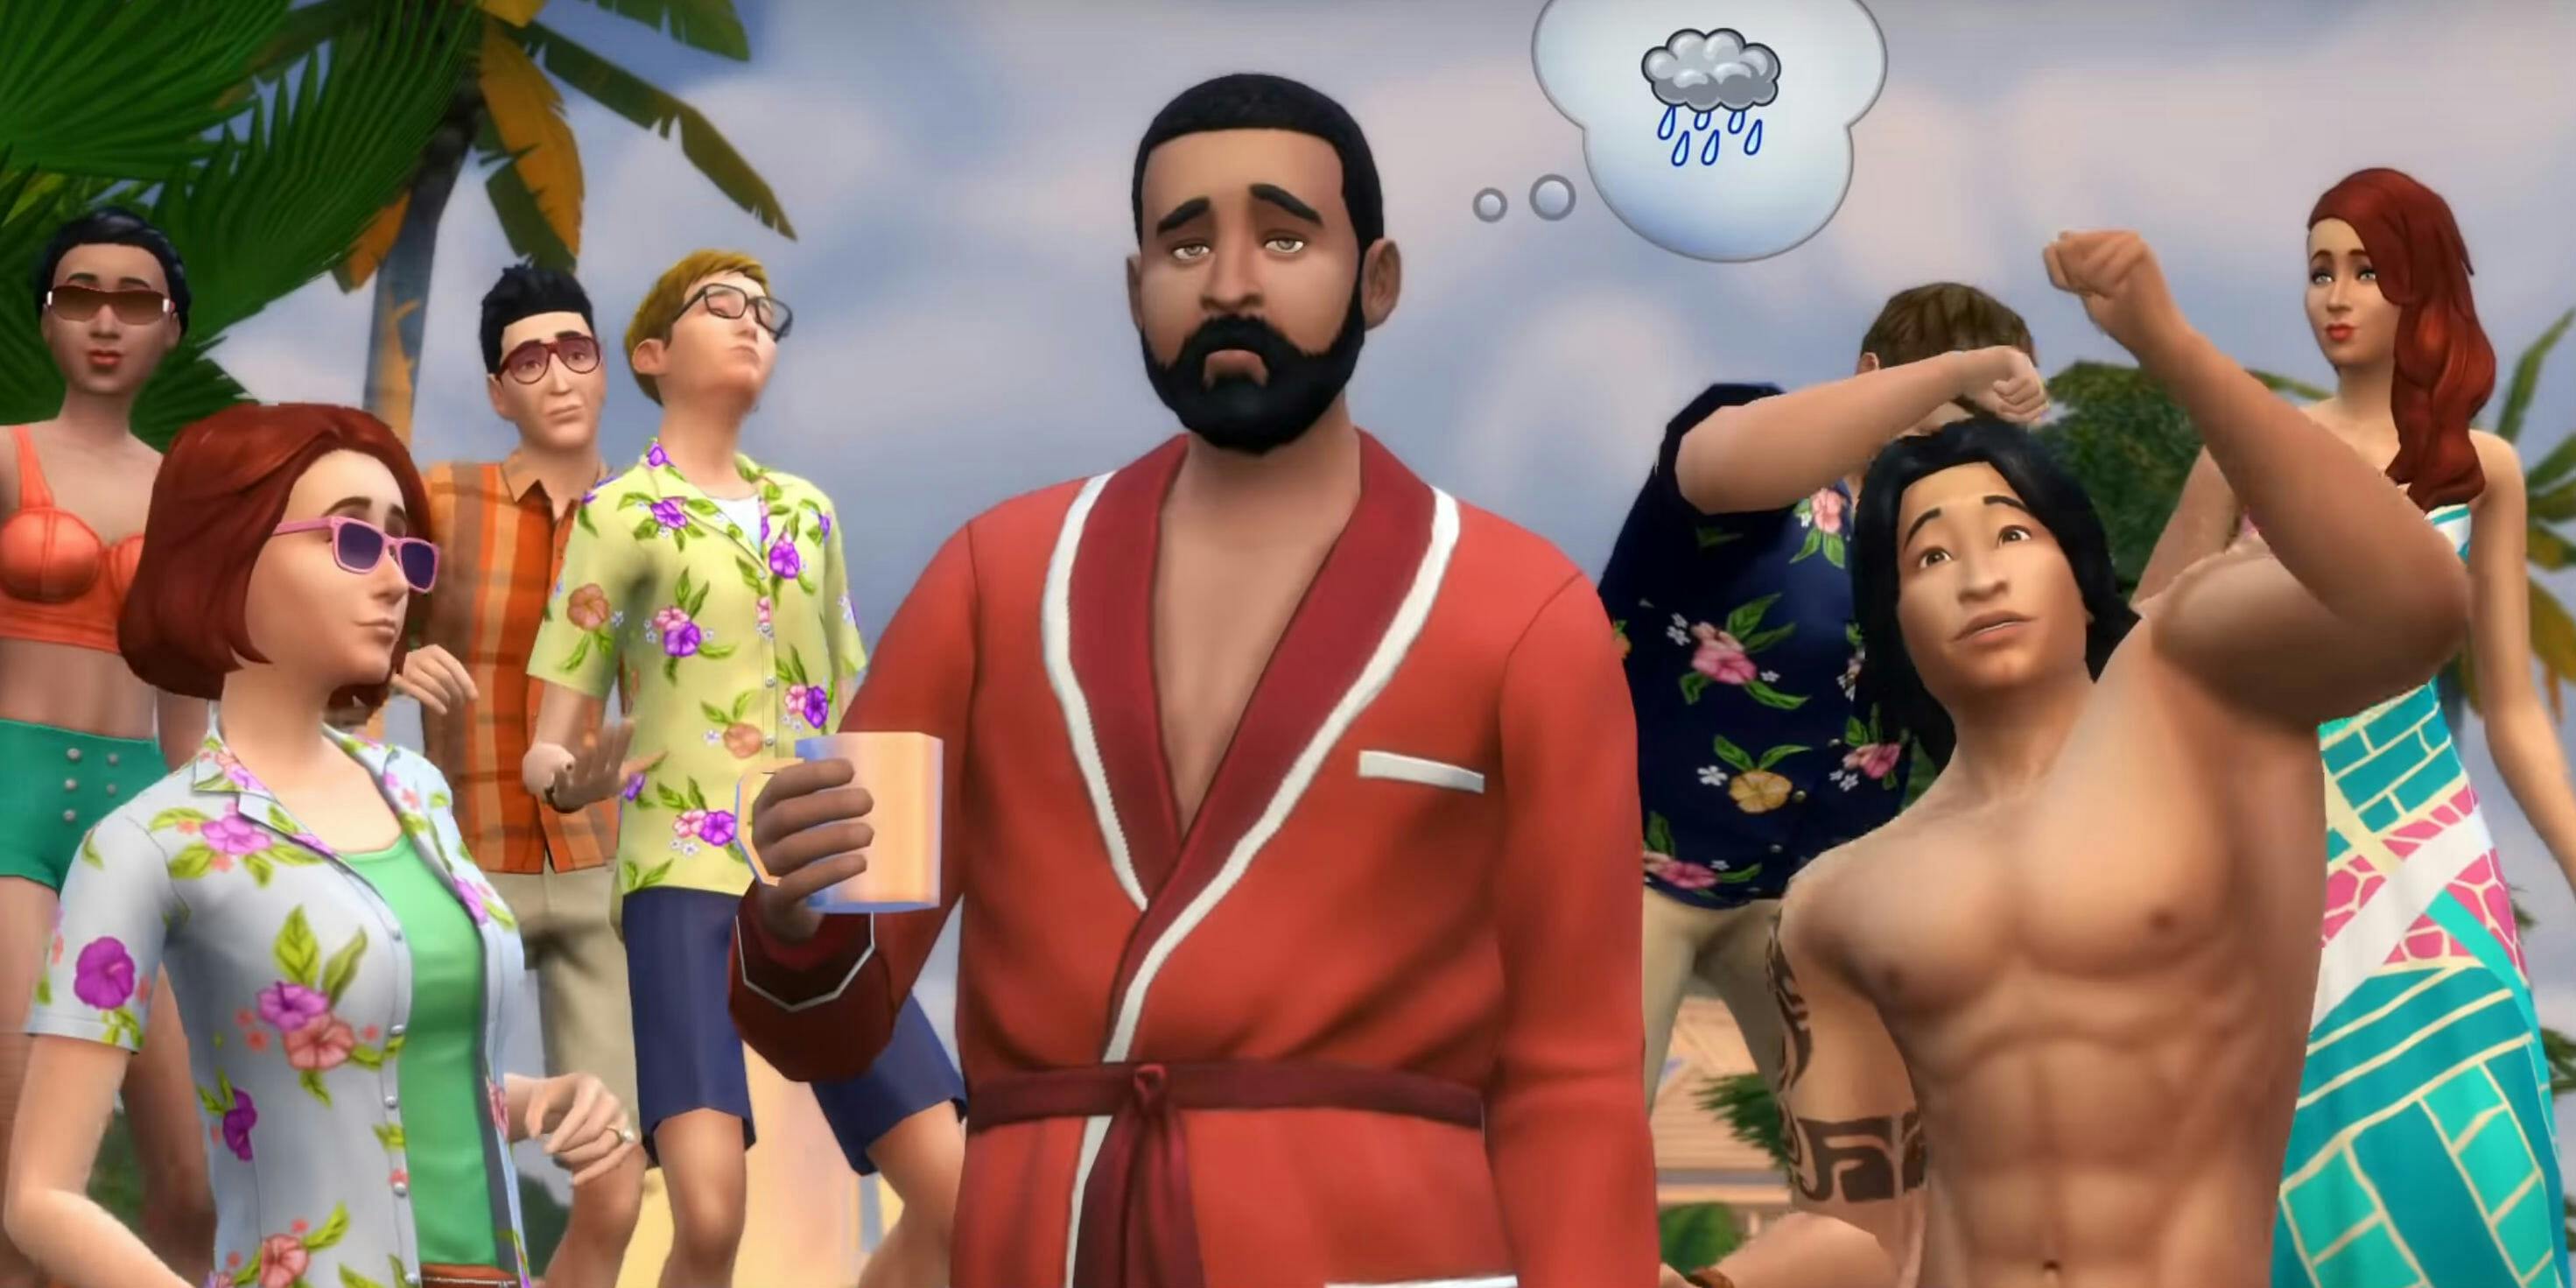 How to Download The Sims 4 for Free: A Step-By-Step Guide